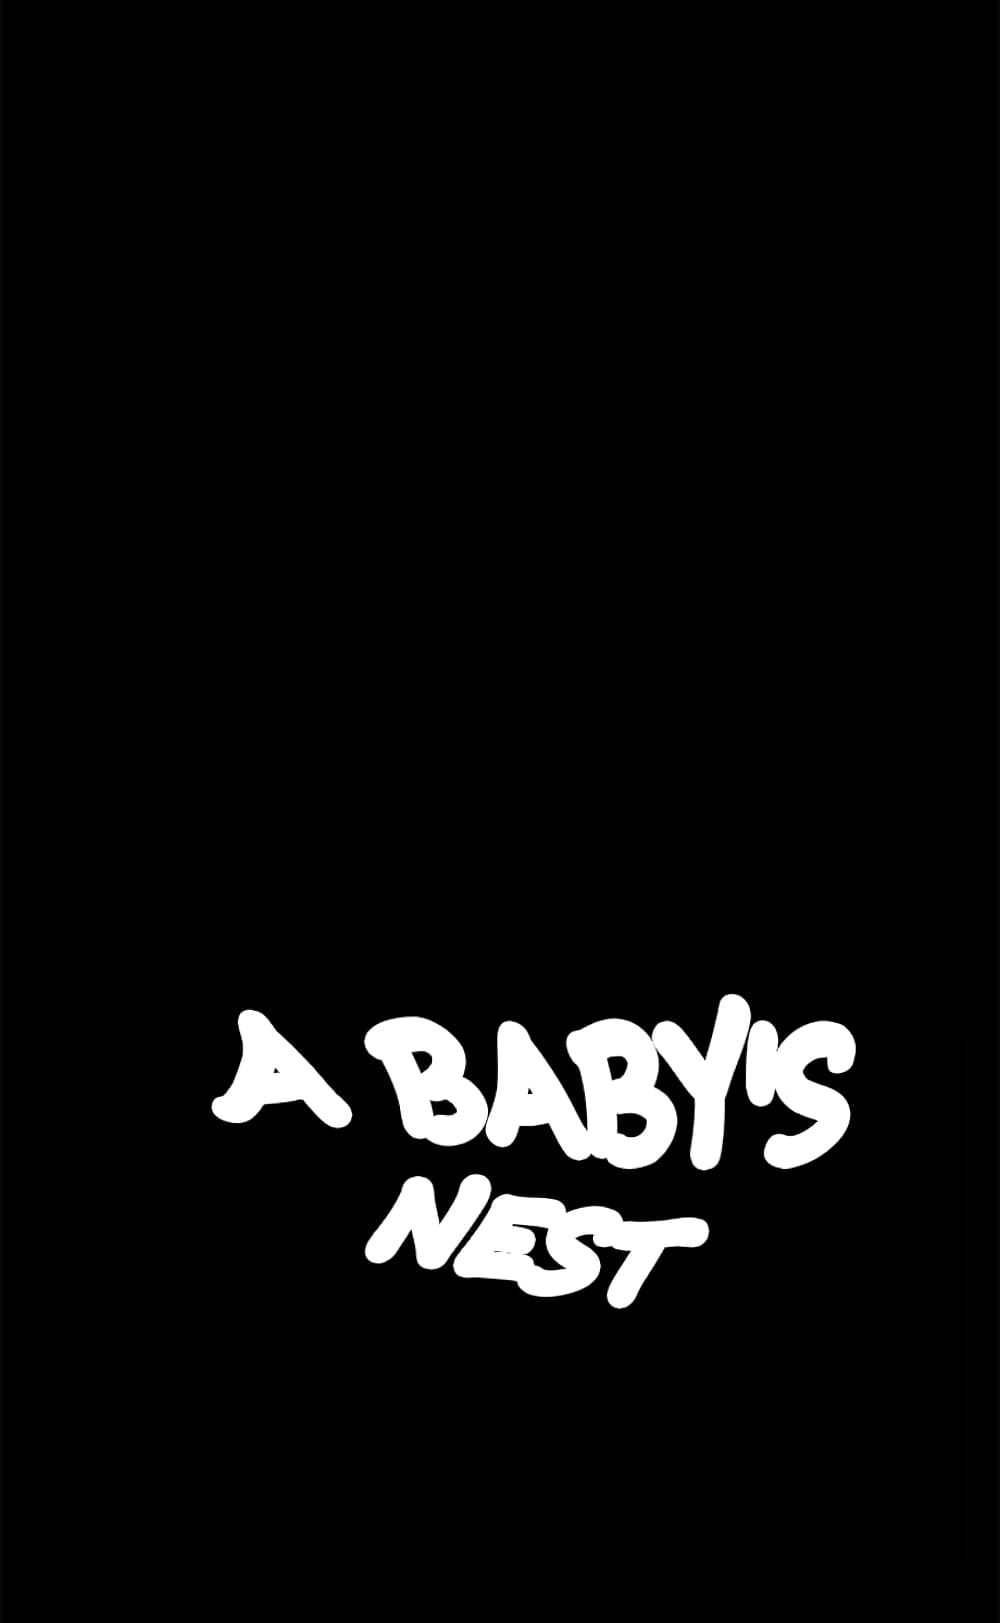 A Baby's Nest 4-4